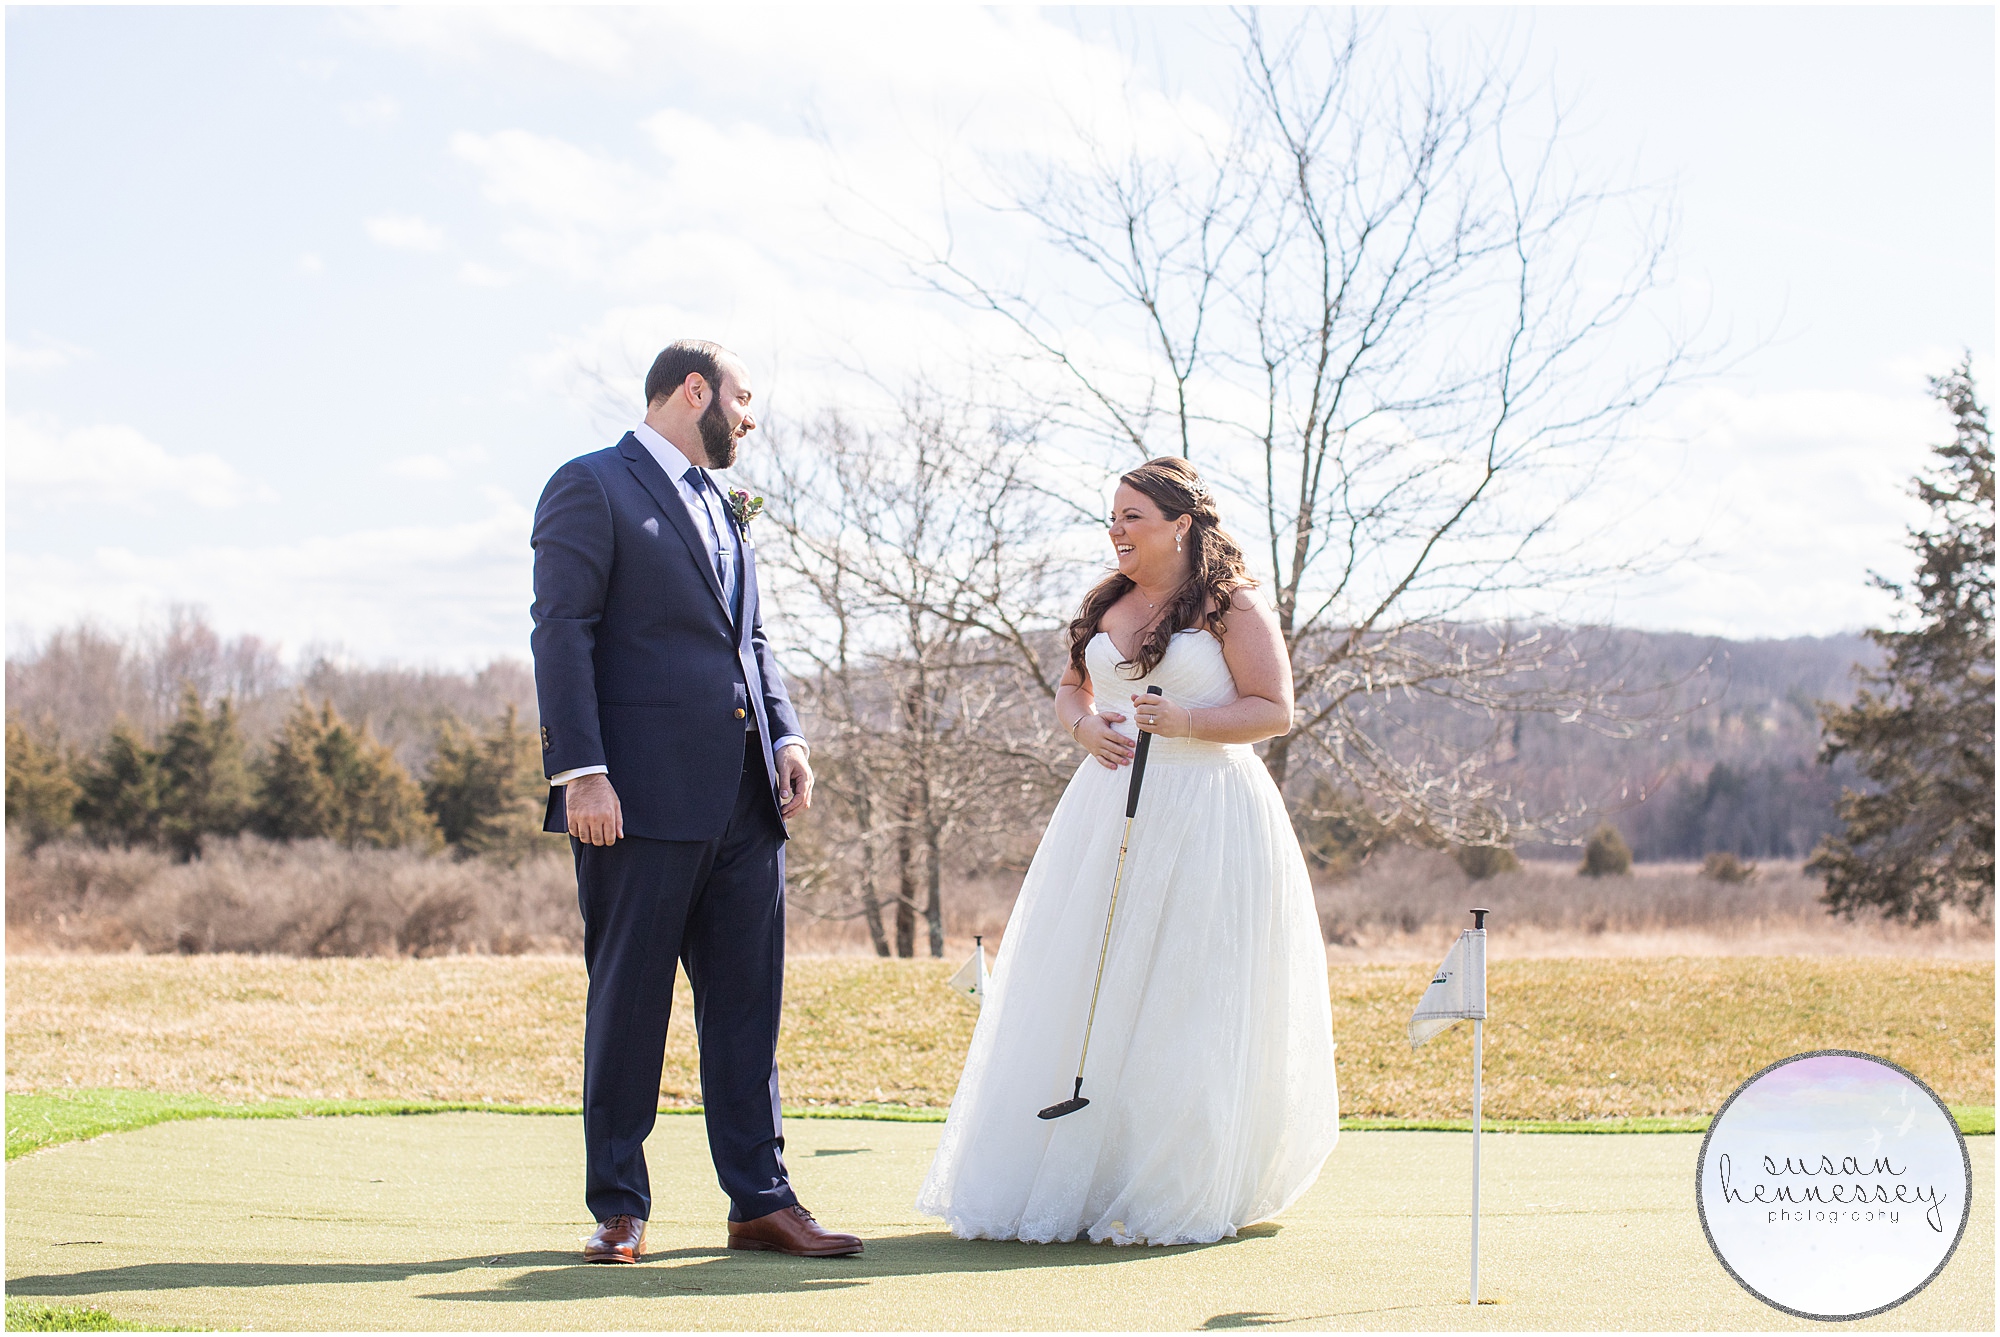 couple playing miniature golf at their wedding